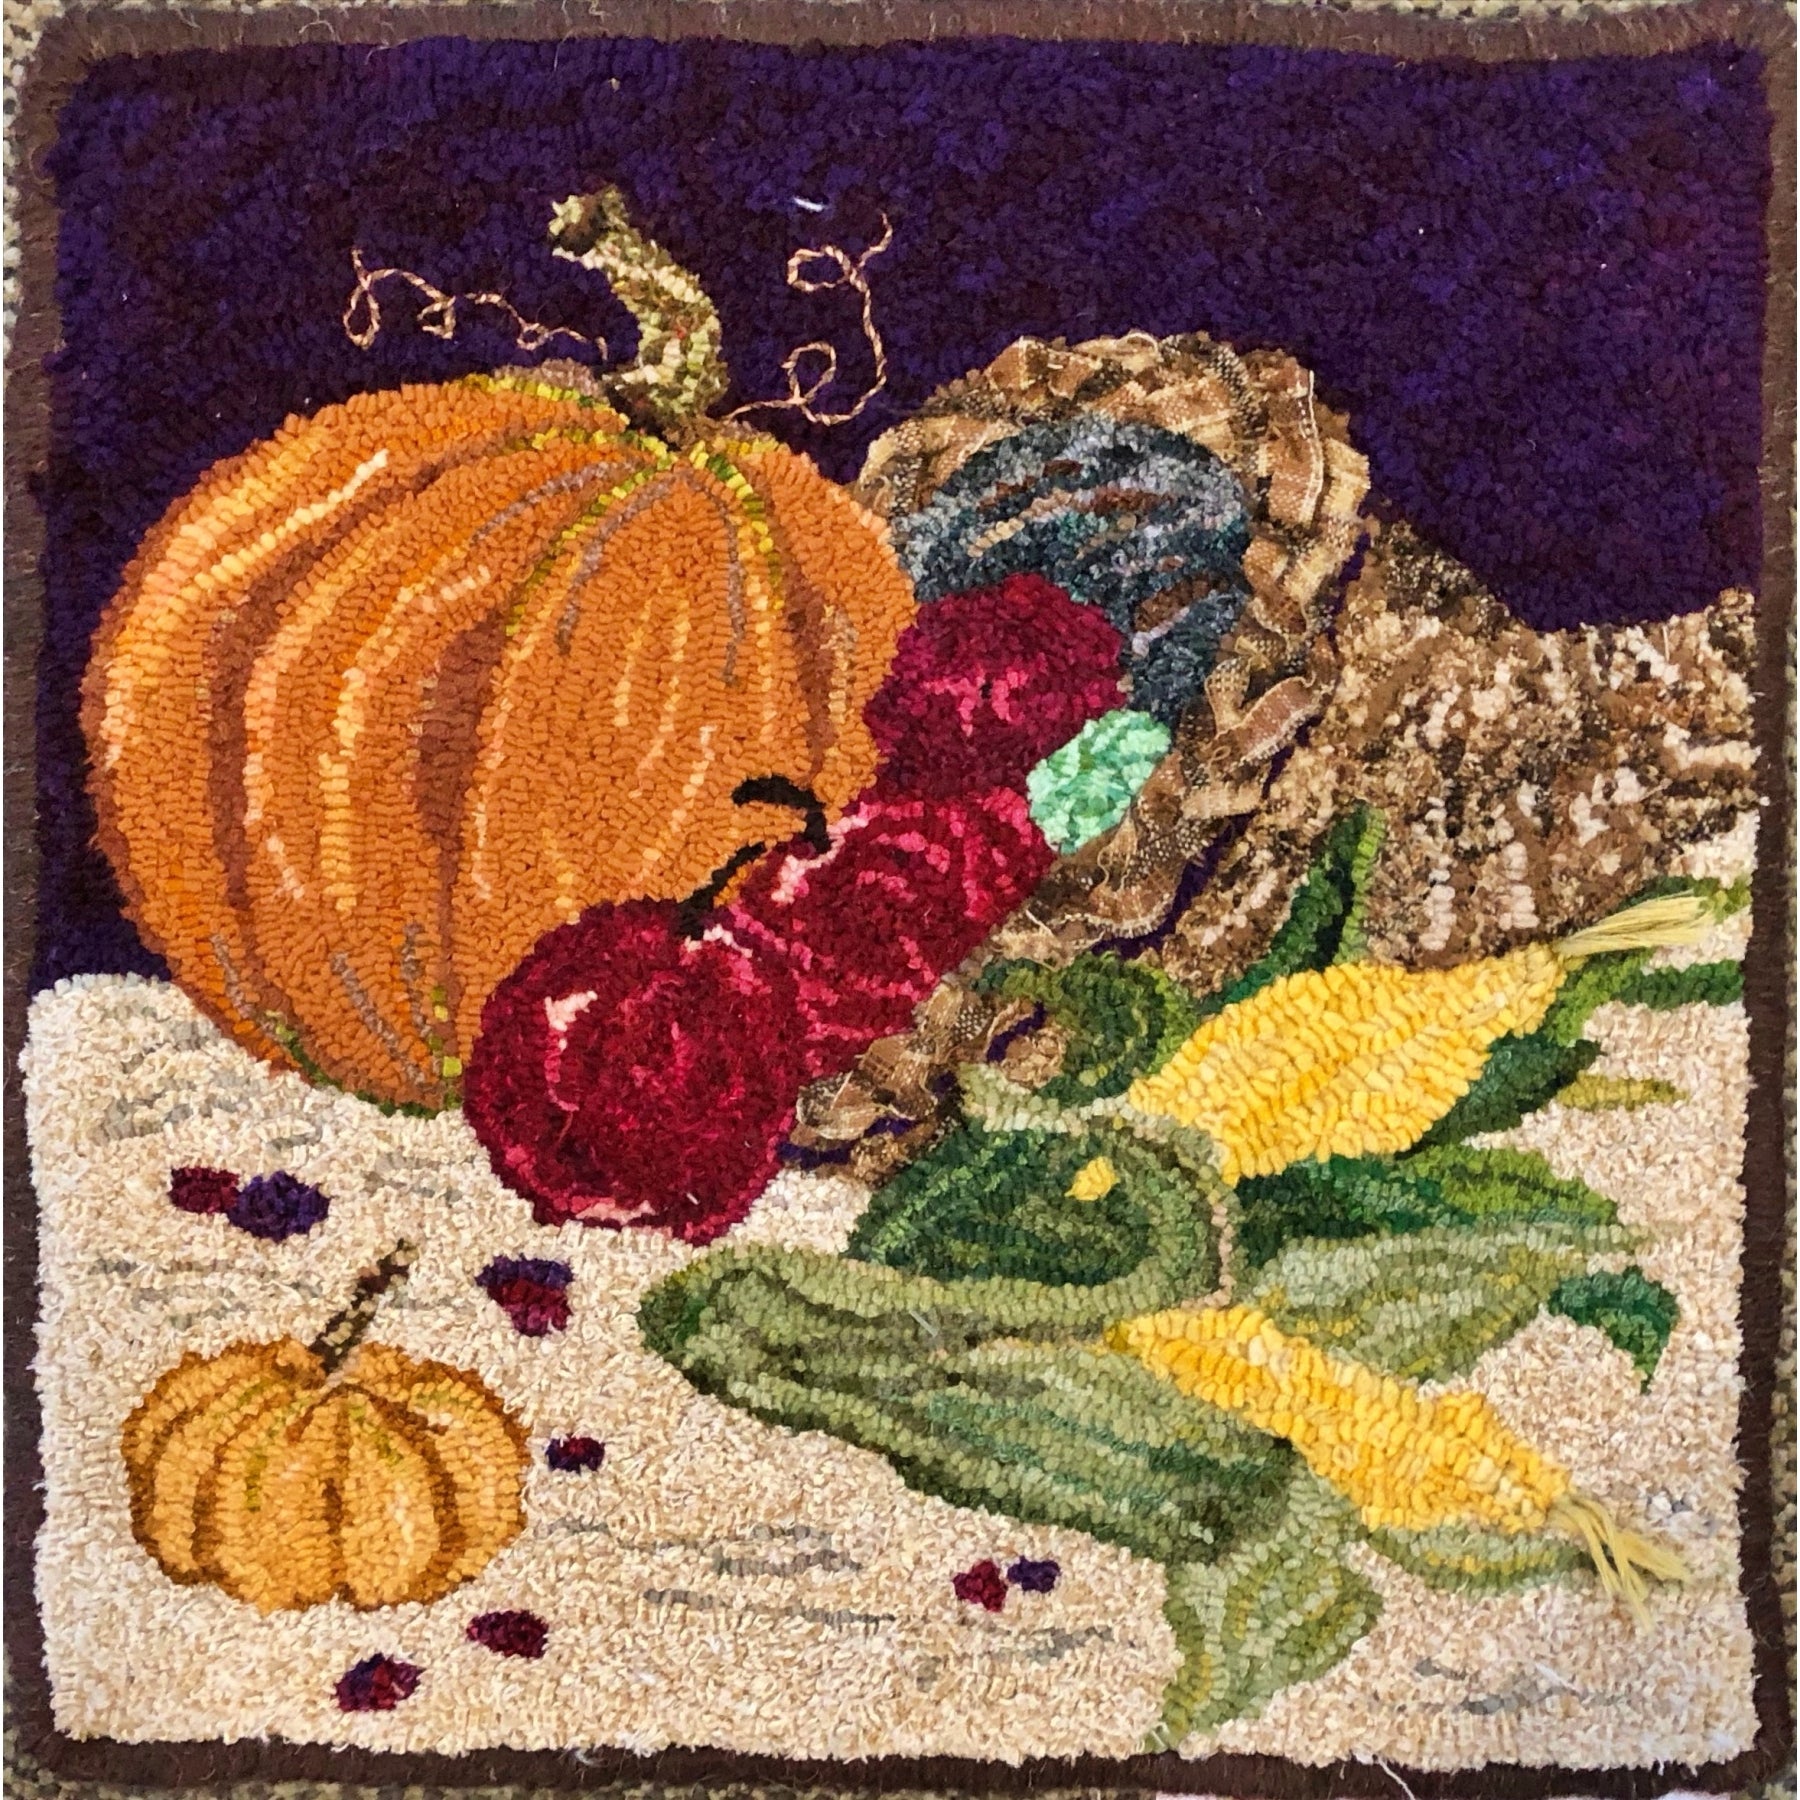 Fall Challenge, rug hooked by Melissa Pattacini